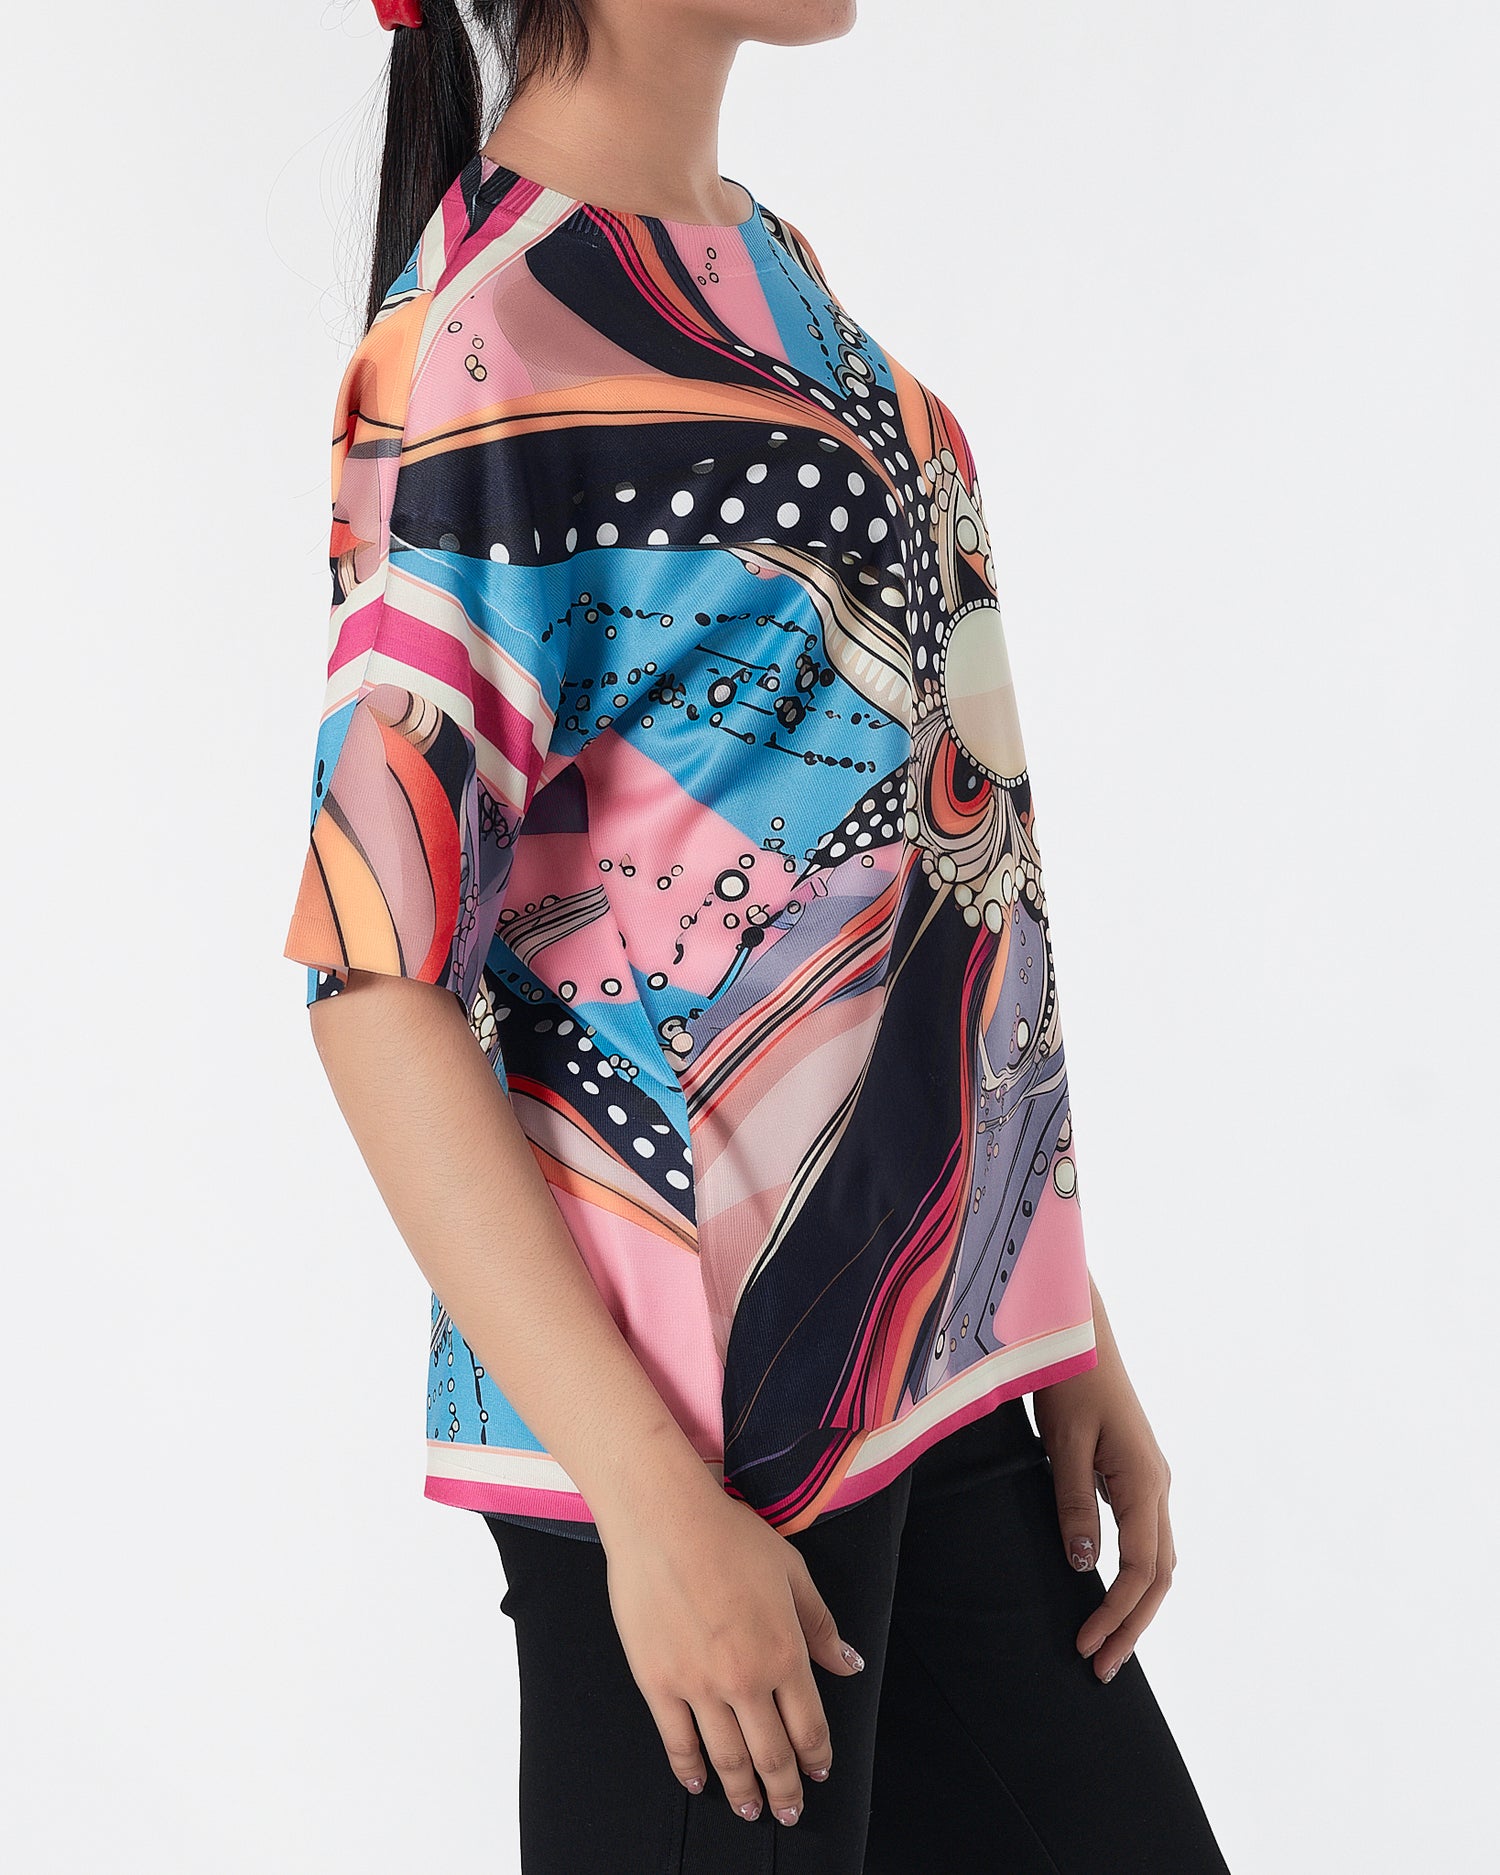 Floral Over Printed Lady Shirt 15.90